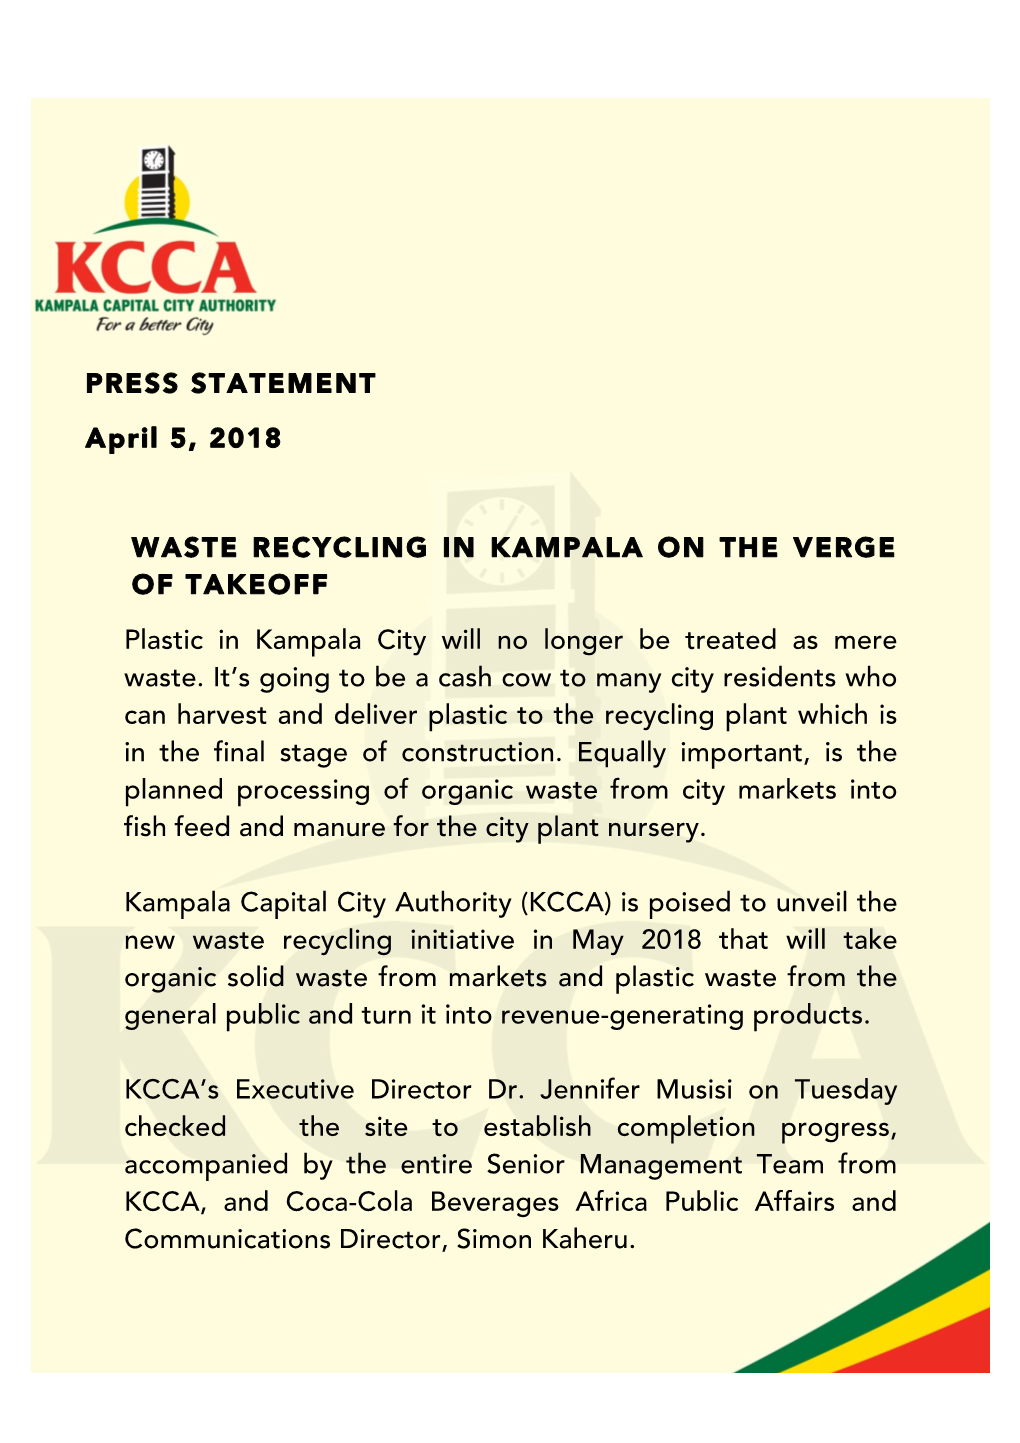 PRESS STATEMENT April 5, 2018 WASTE RECYCLING in KAMPALA